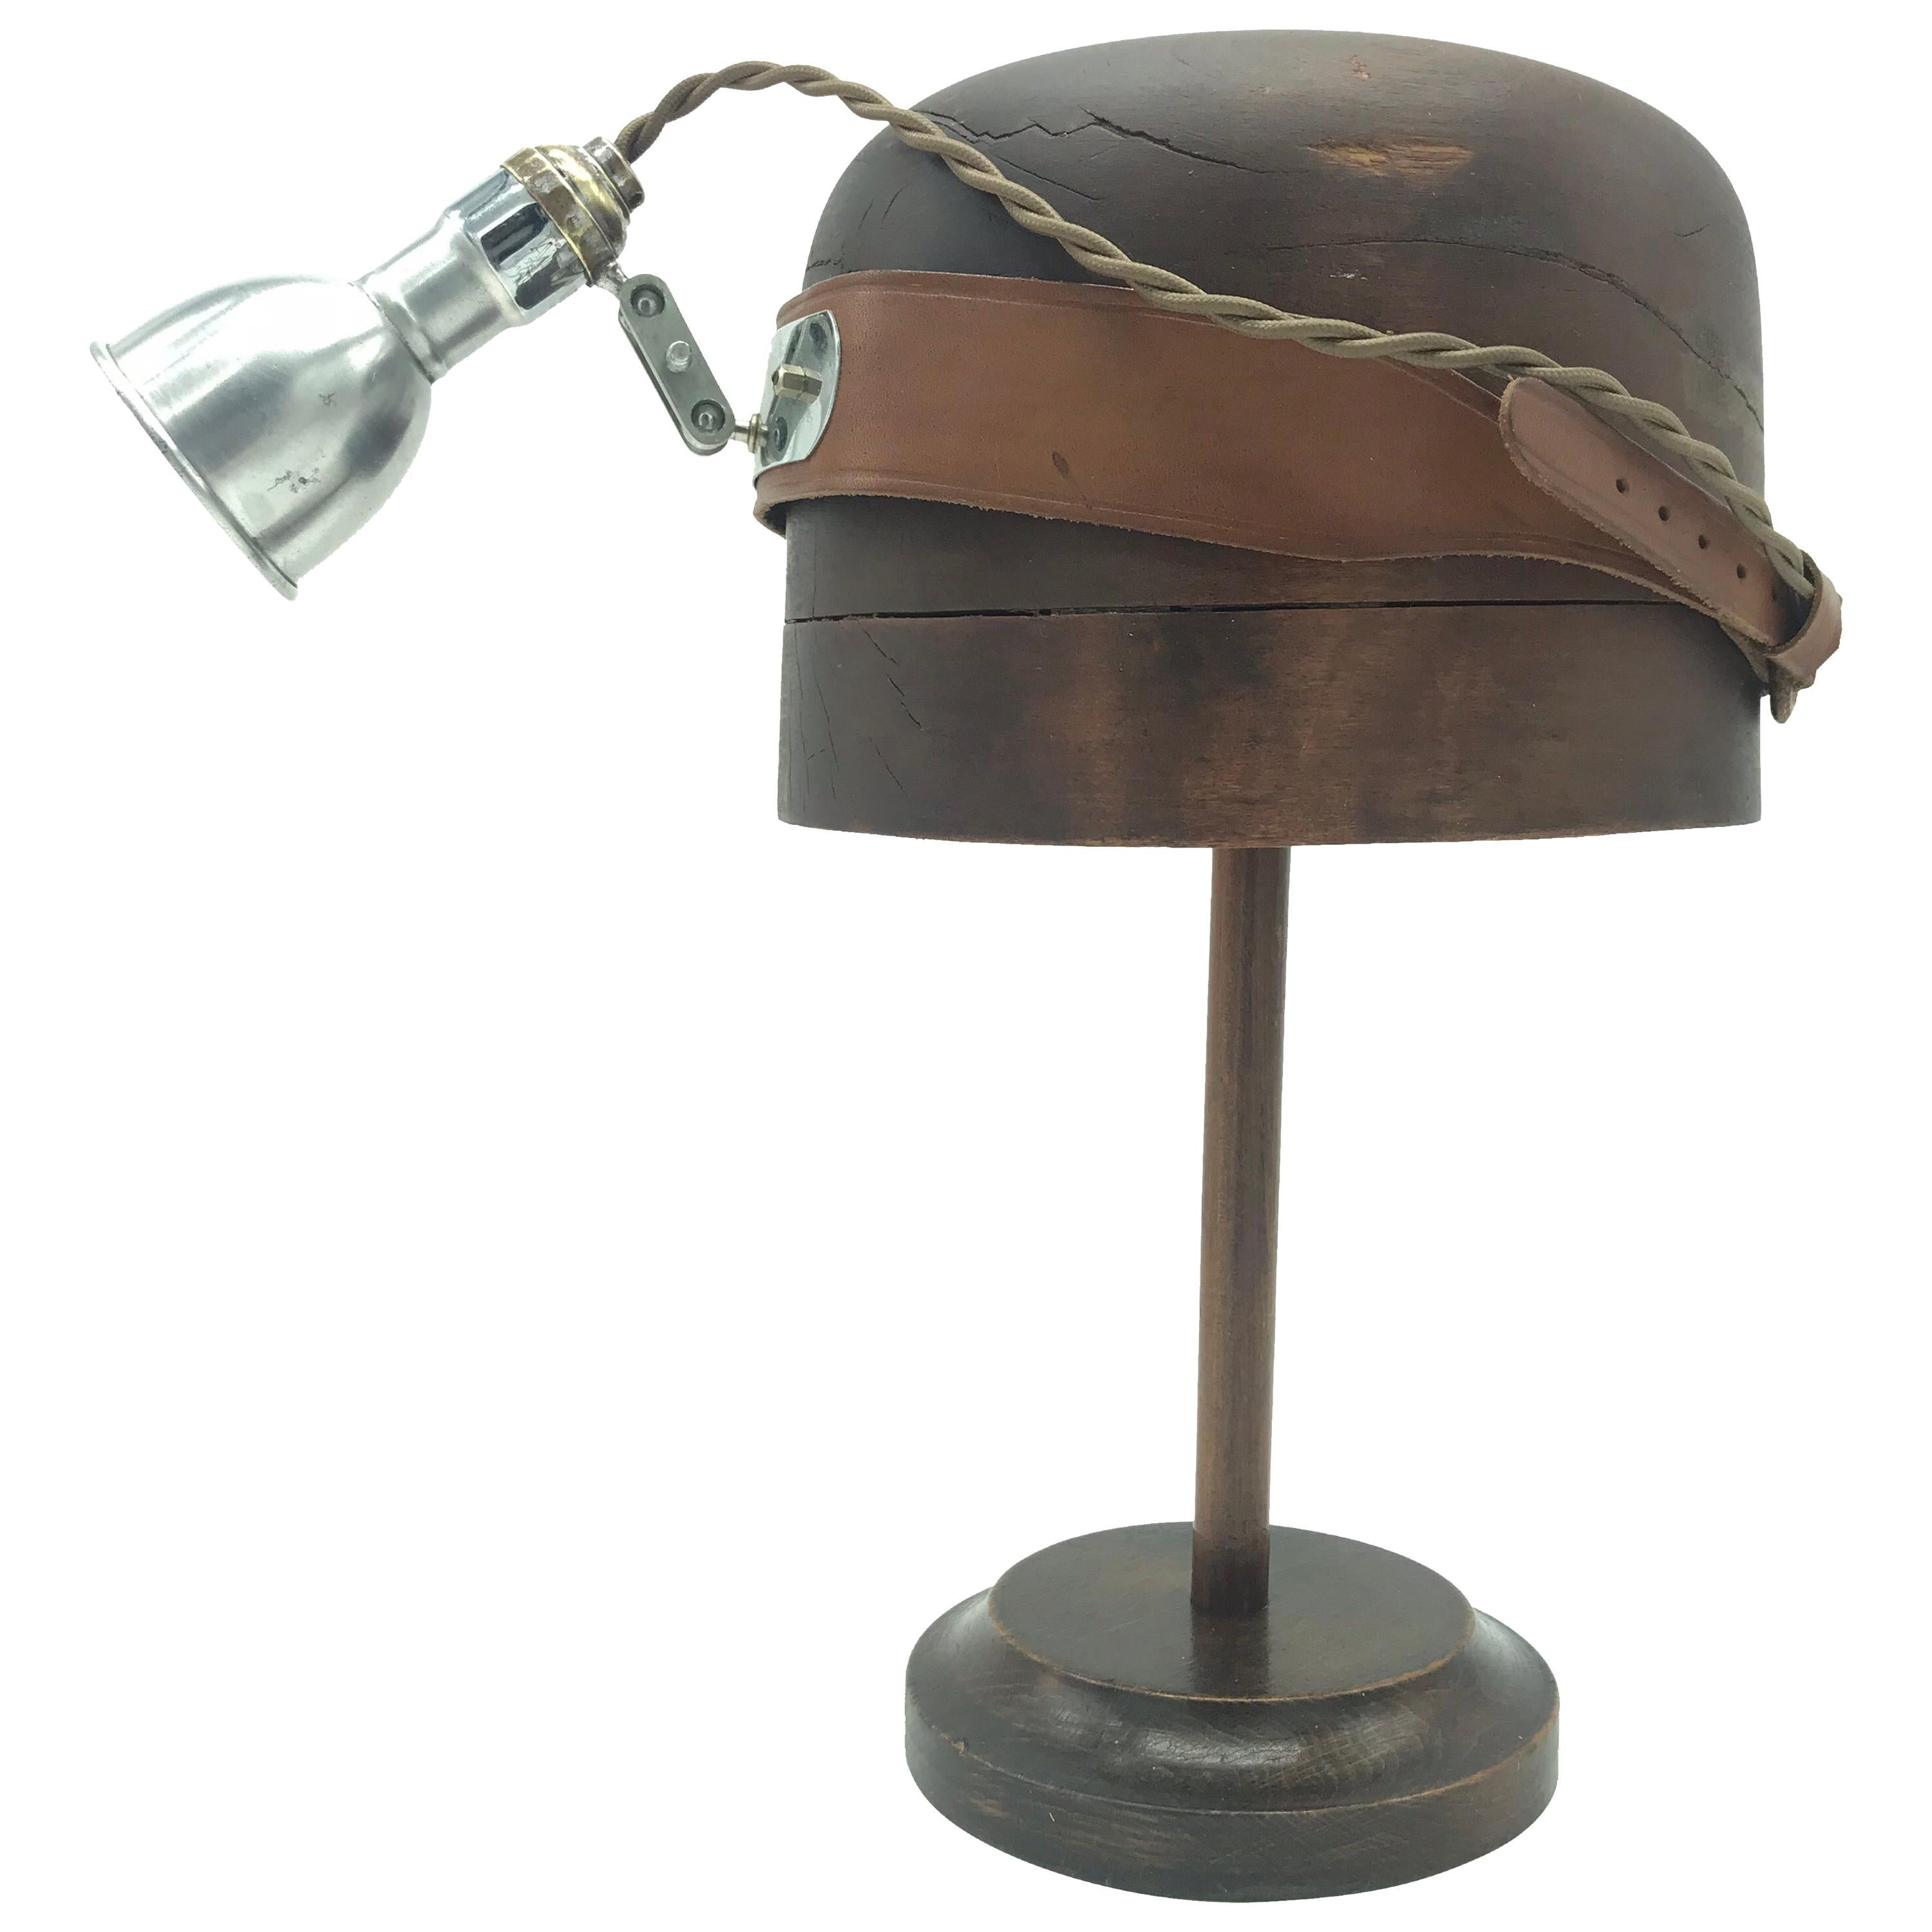 Antique Medical Head Lamp Display Stand